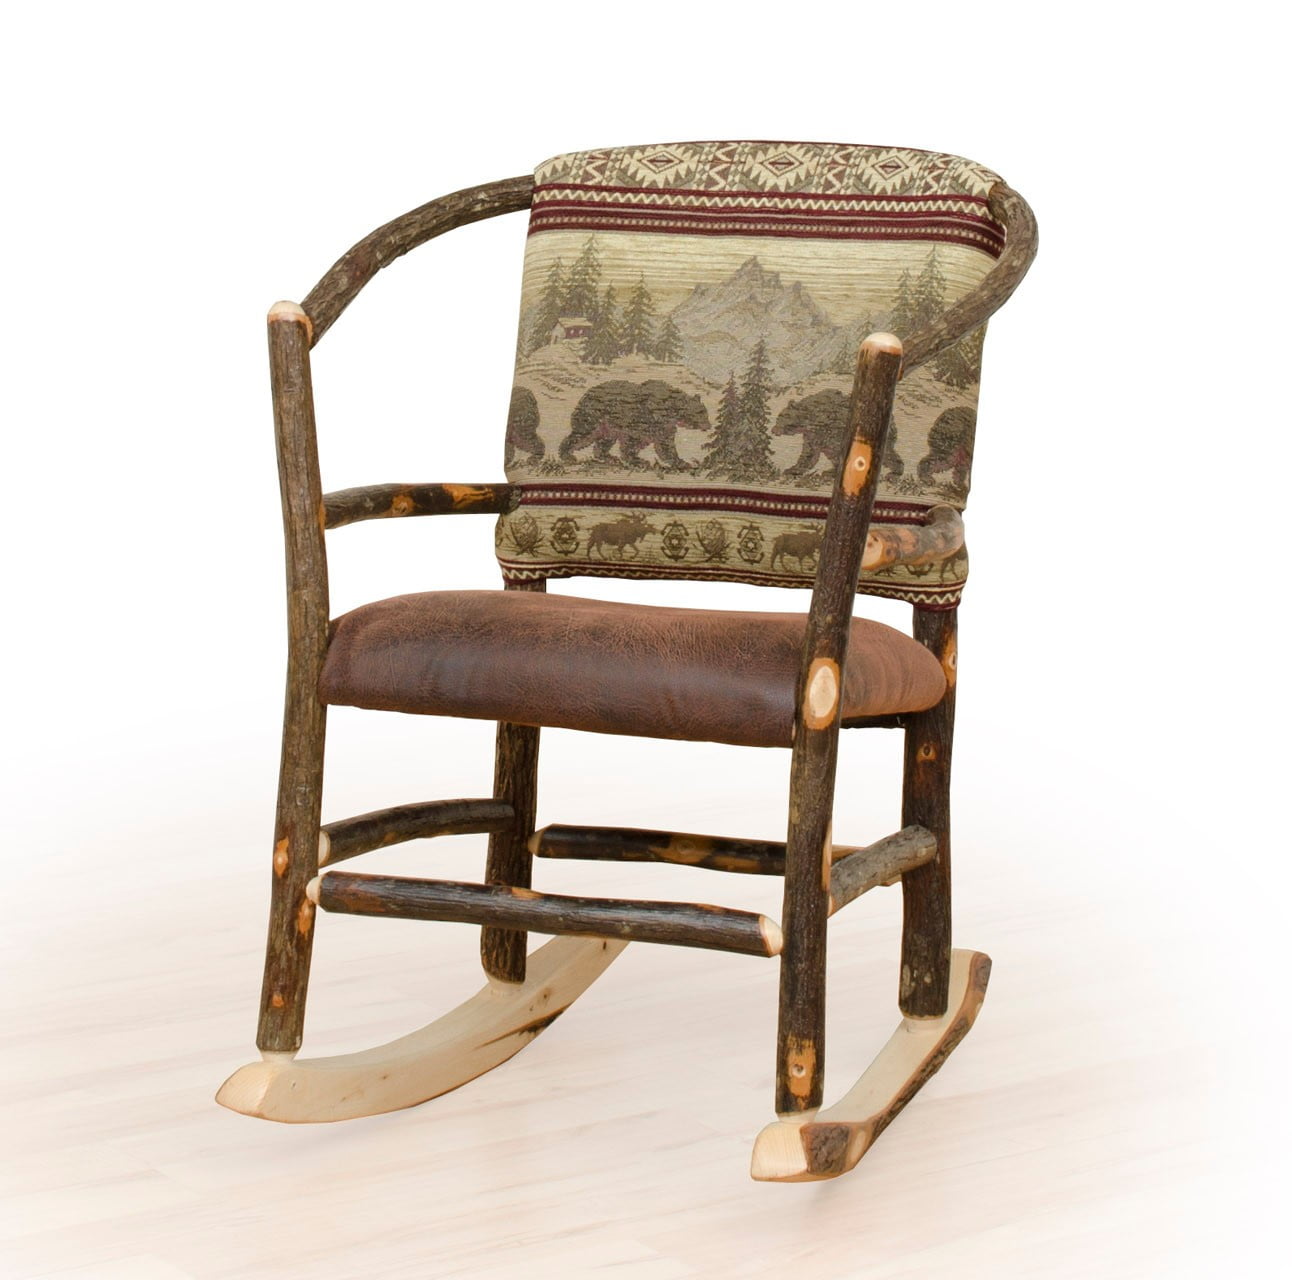 Rustic Hickory Log Hoop Rocking Chair – Faux Brown Leather Seat & Upholstered Back